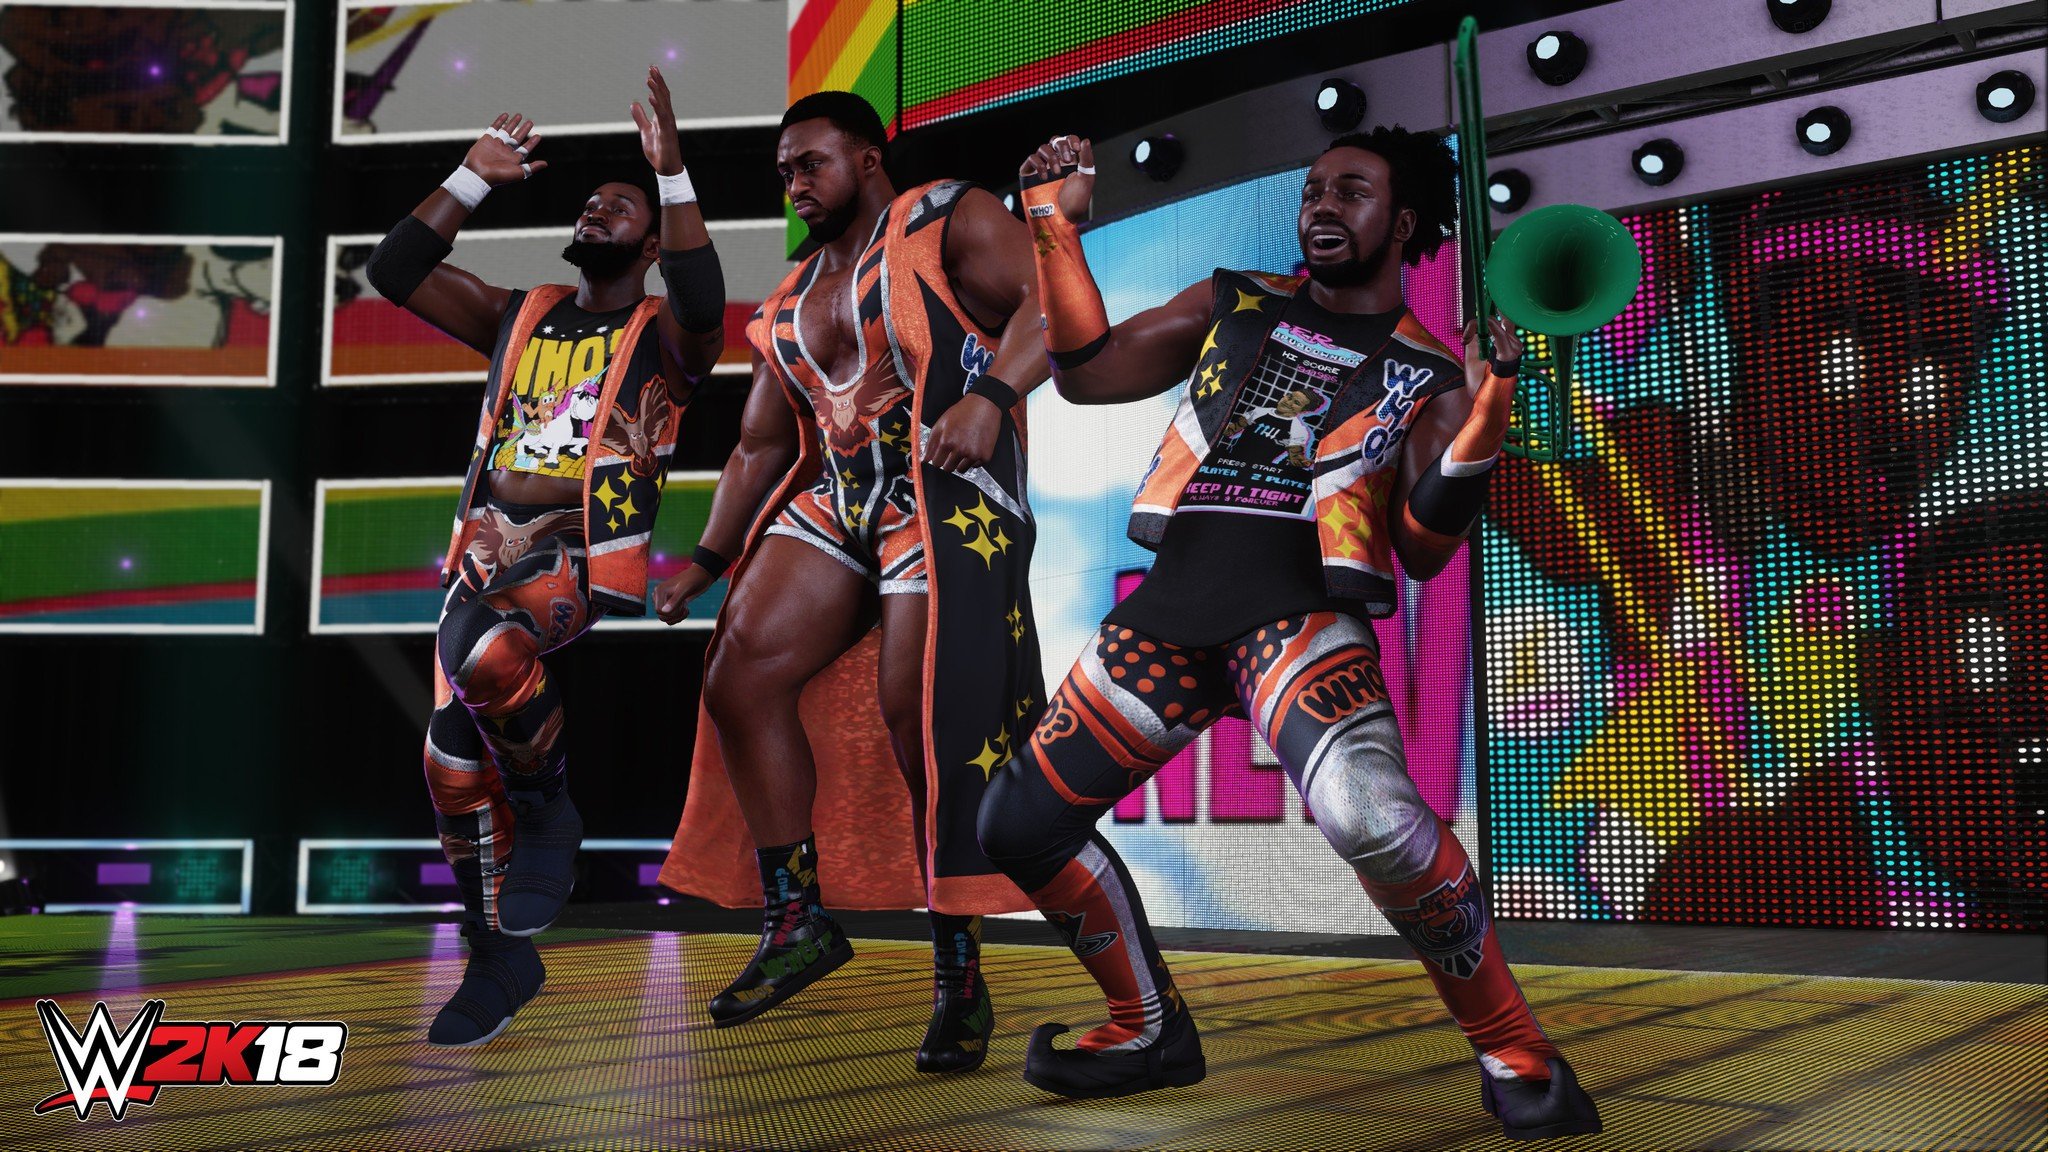 Wwe 2k18 Full Roster List Every On Disc And Dlc Superstar